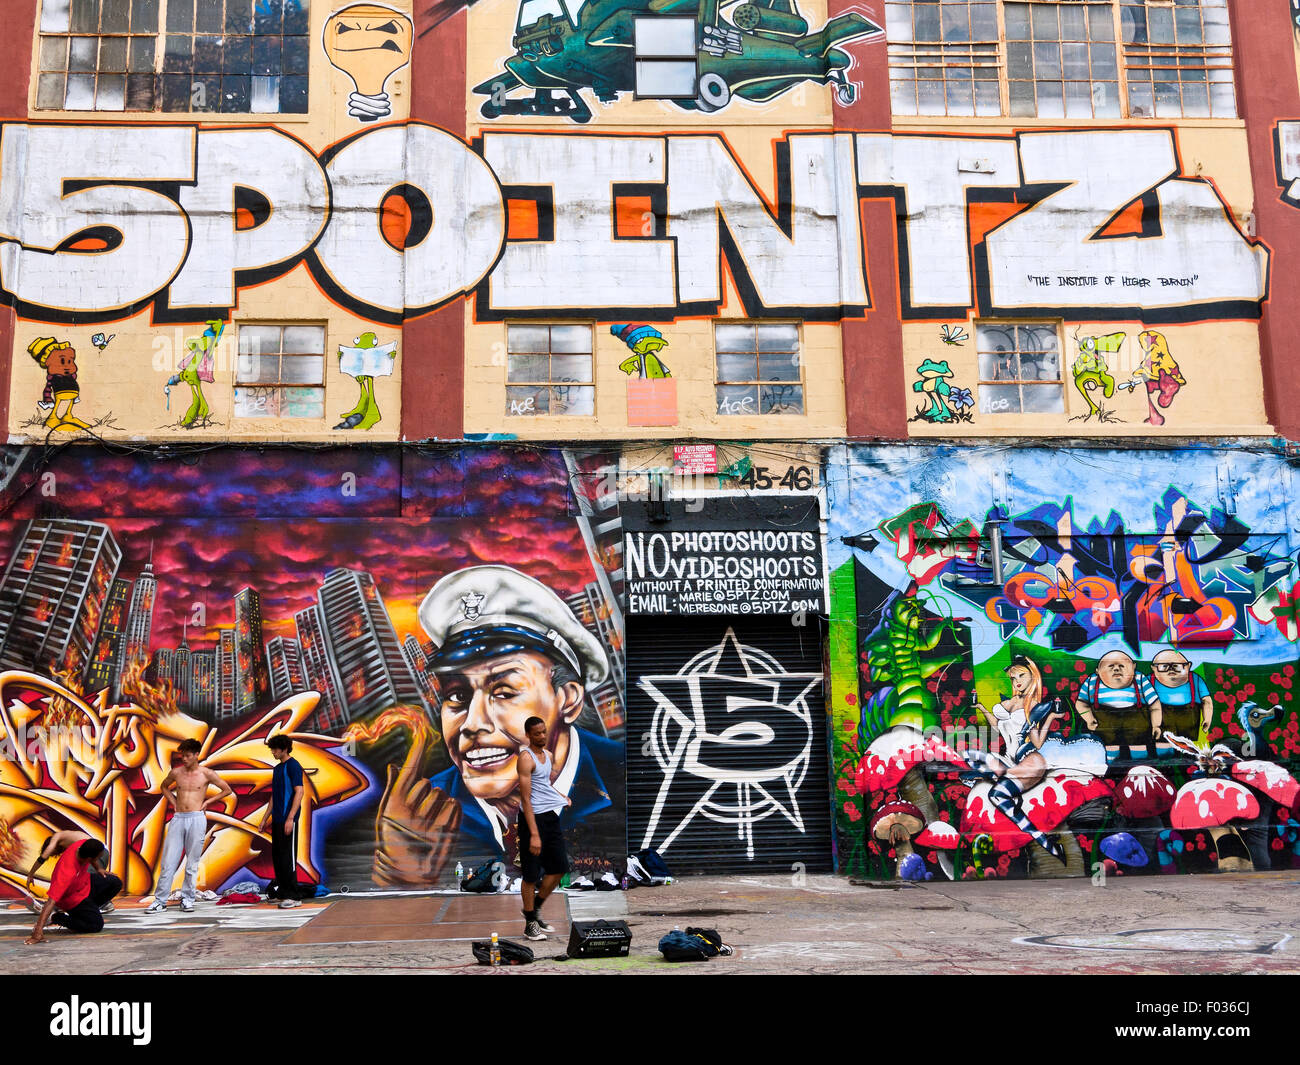 5 Pointz, Long Island City, Queens, New York, famous as the Graffiti Museum. Stock Photo